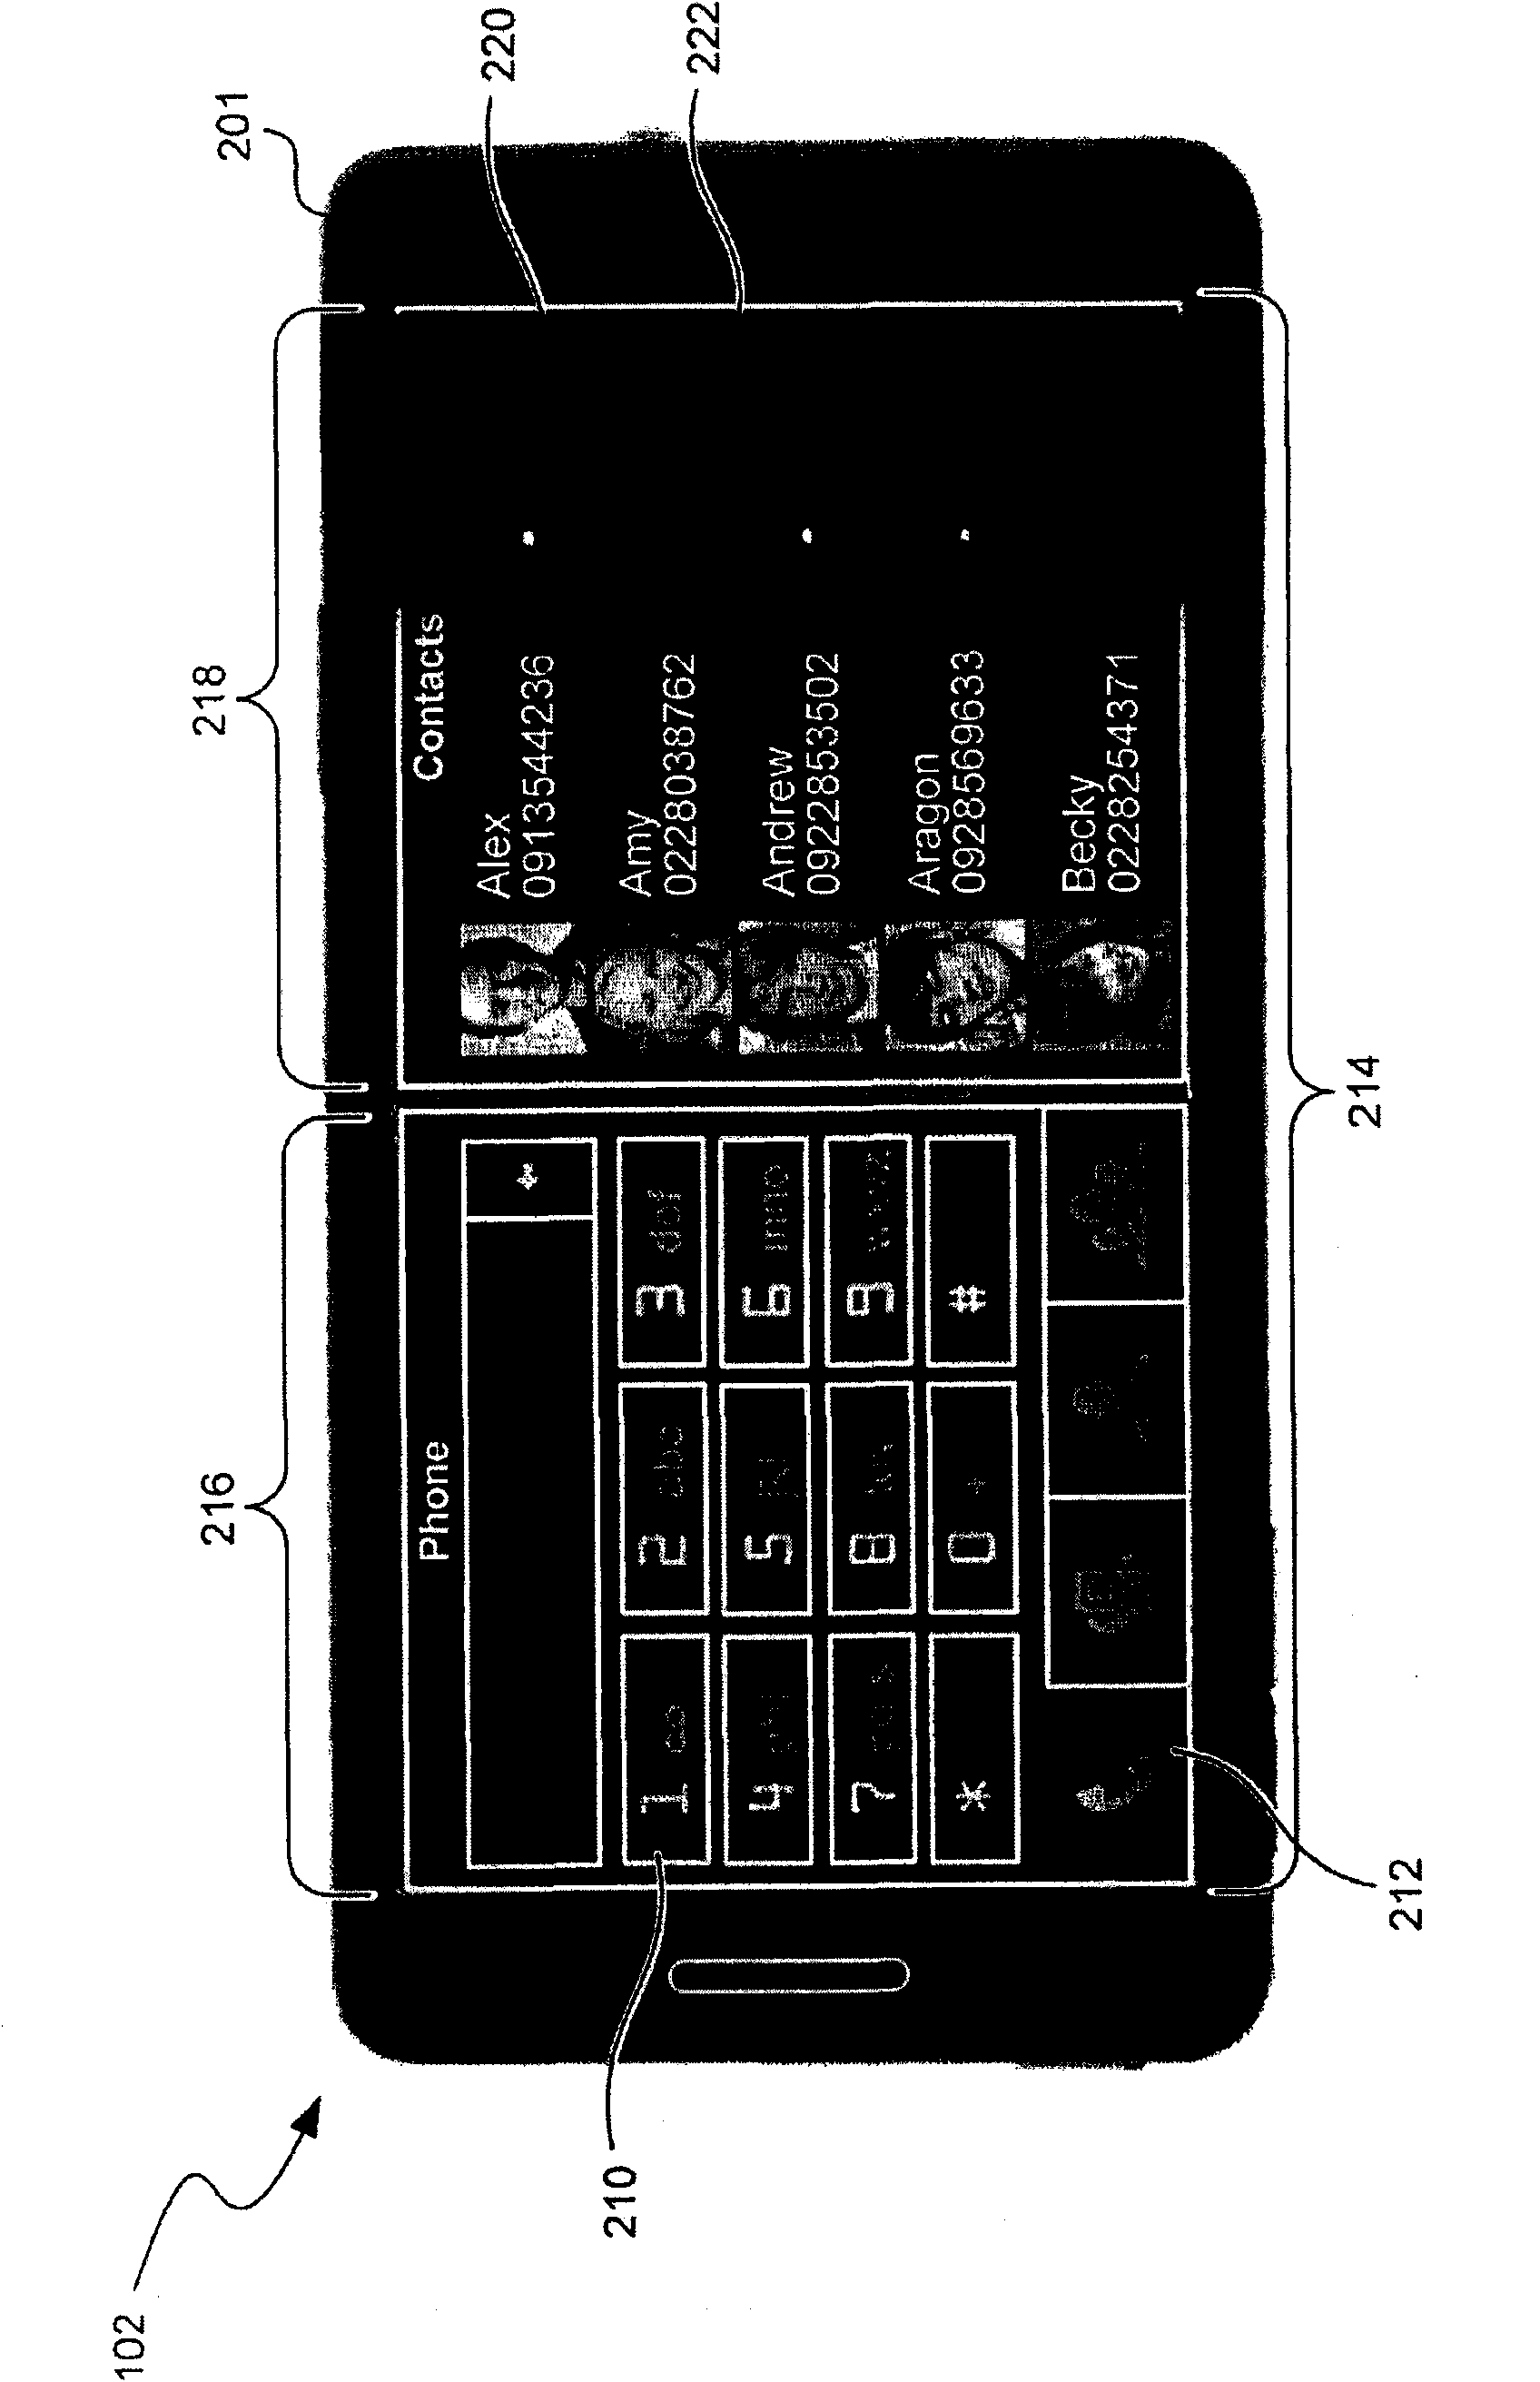 Mobile device interface with dual windows